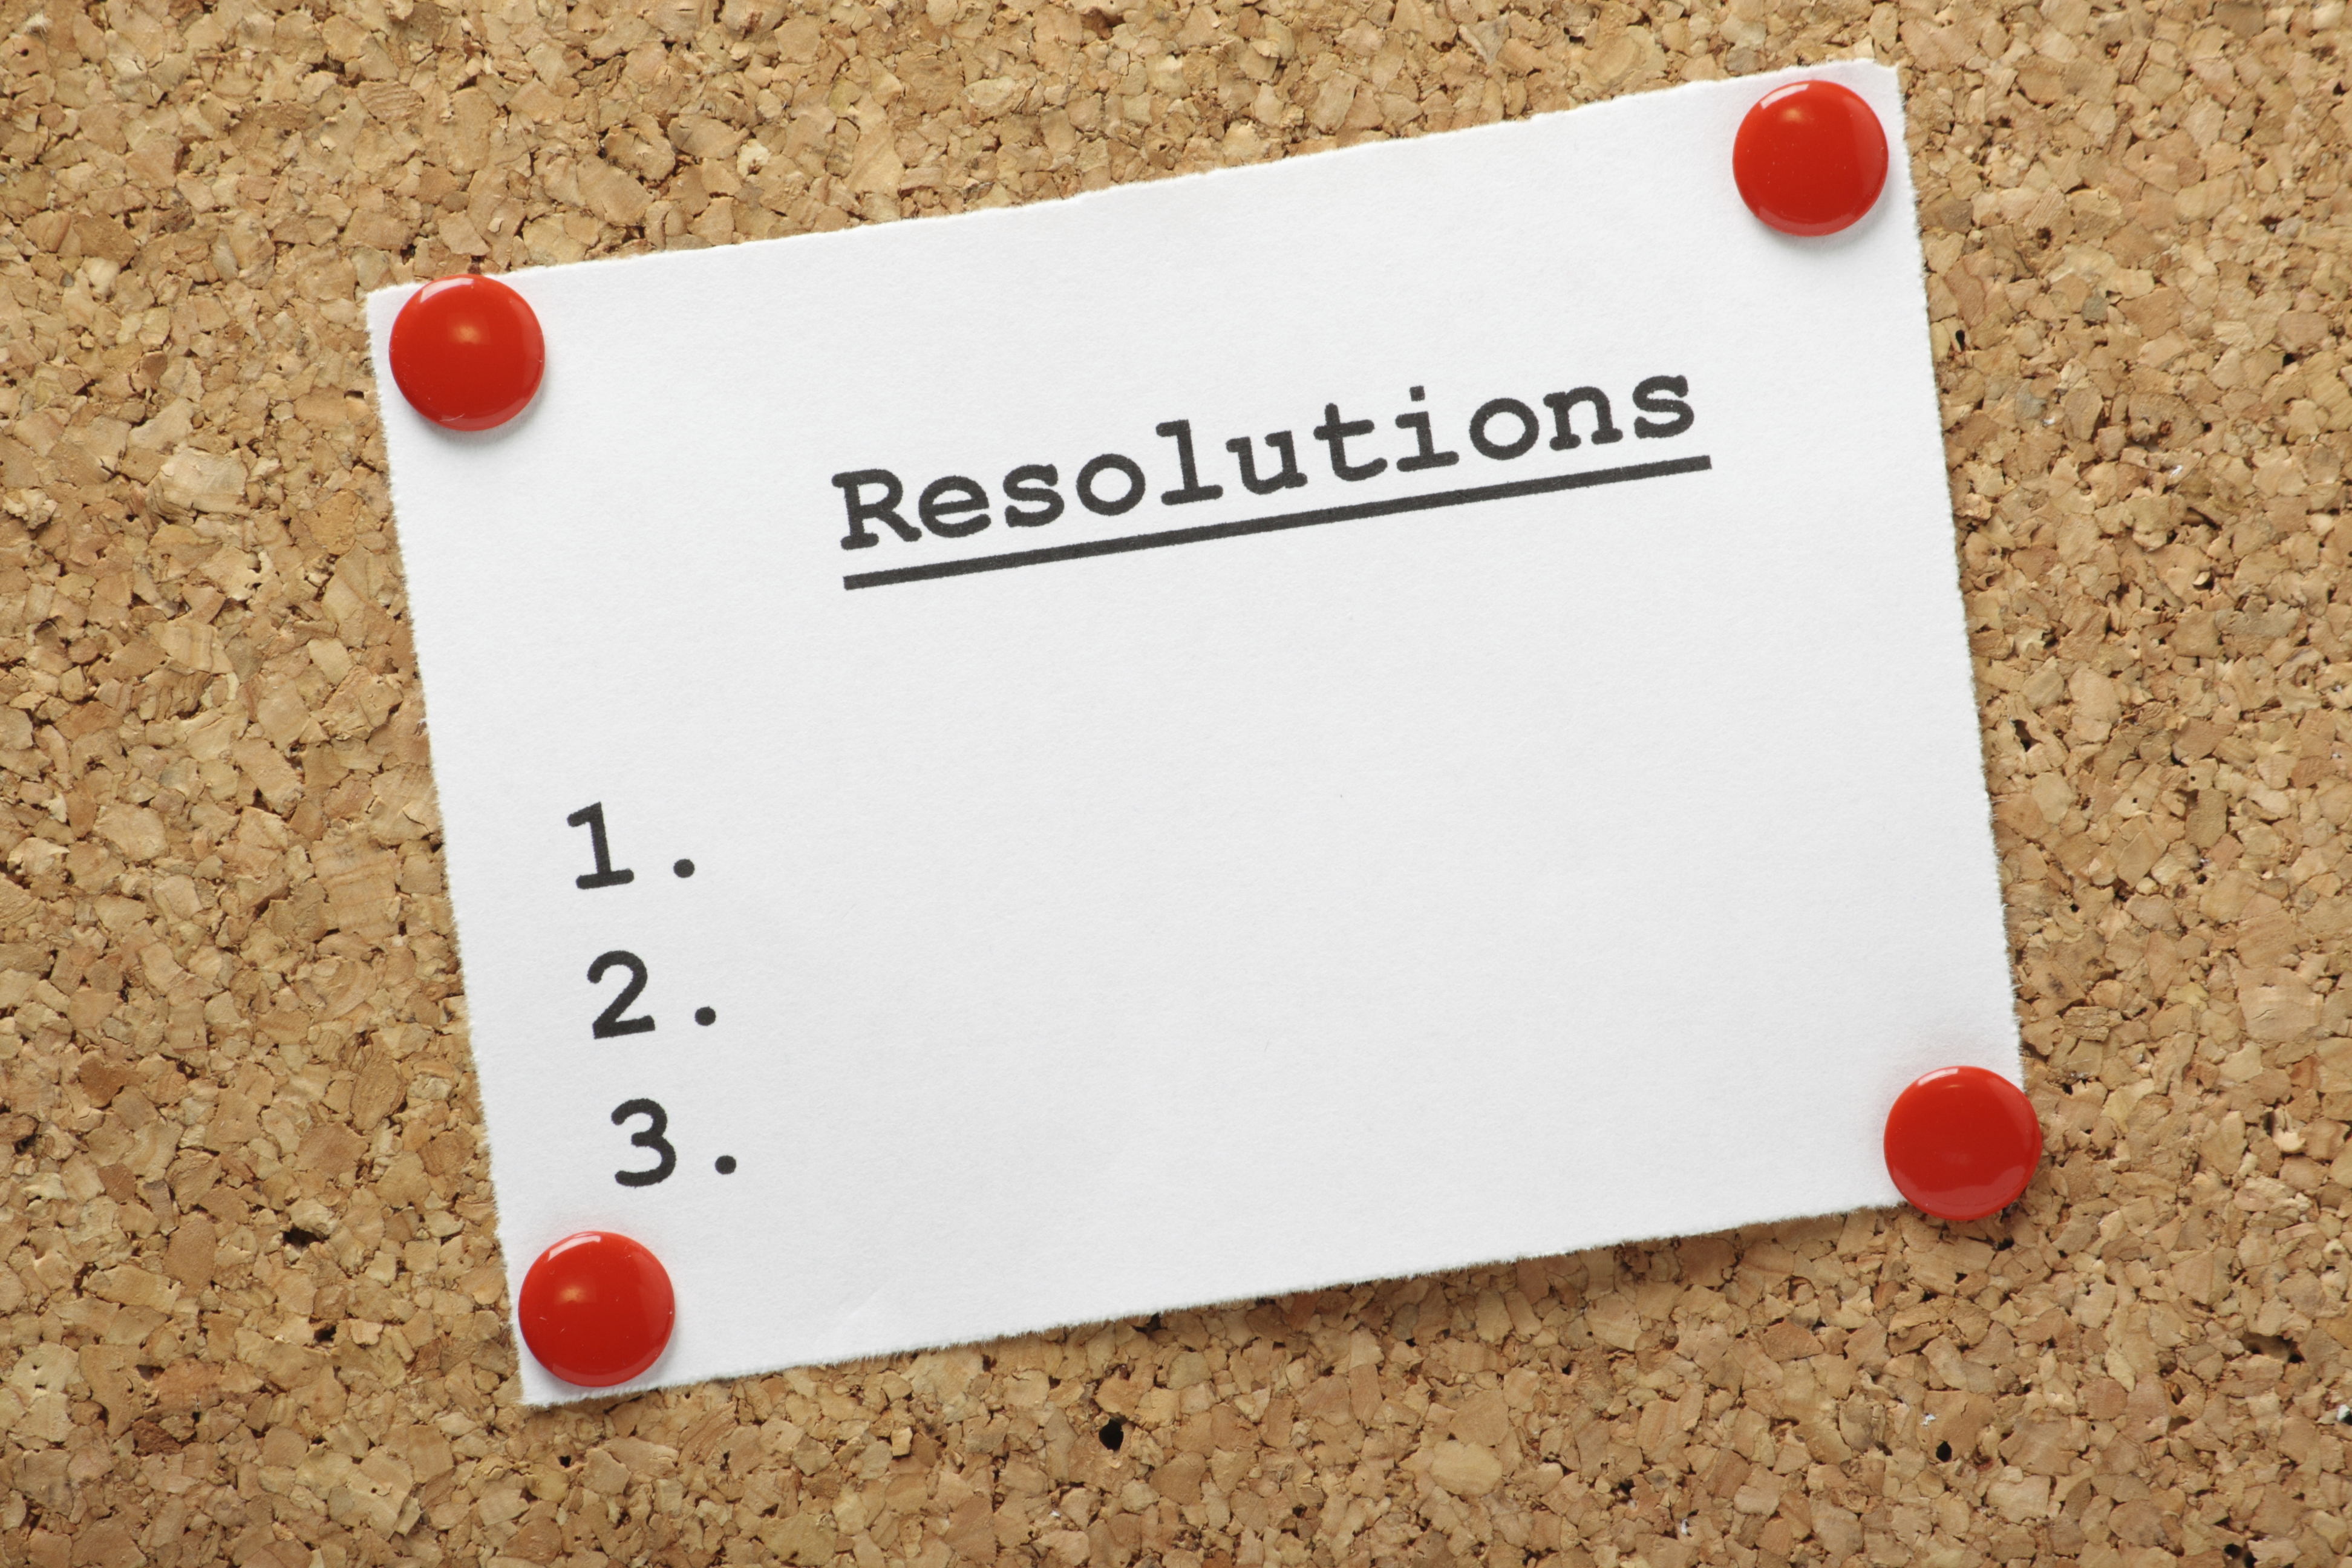 Do new year resolutions. New year`s Resolutions. New year Resolutions картинки. Resolution list. New year Resolutions фон.